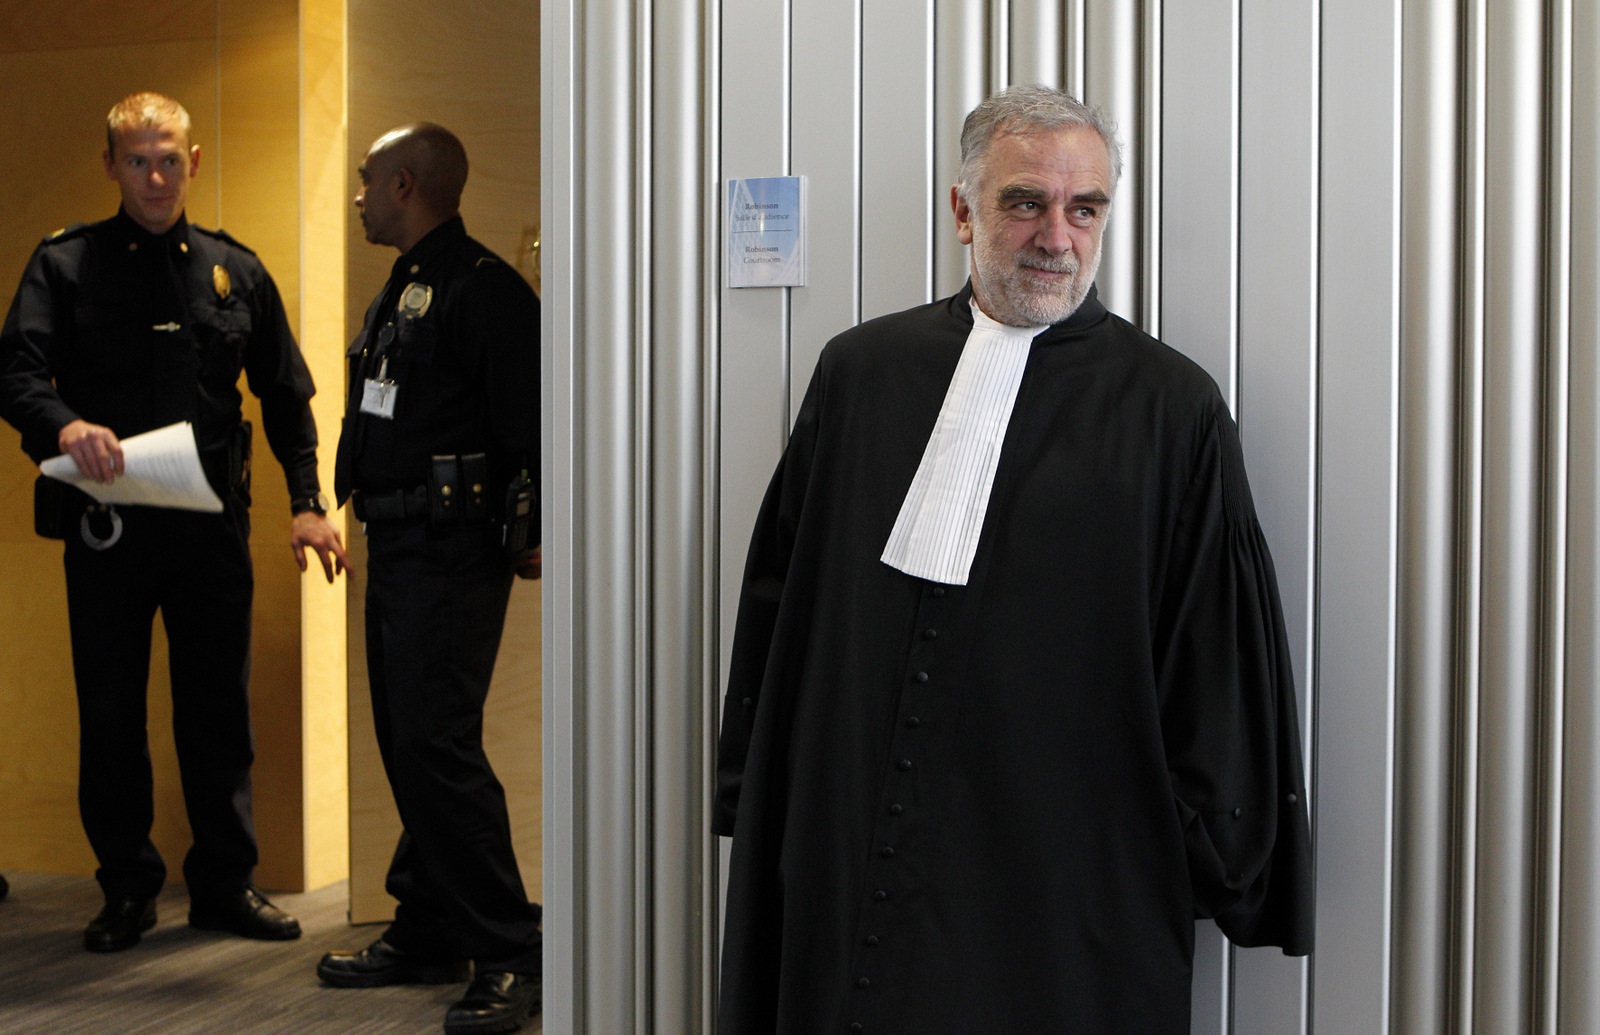 Luis Moreno-Ocampo leaves after a swearing-in ceremony at The International Criminal Court (ICC) in The Hague, Netherlands, Friday, June 15, 2012.  (AP/Bas Czerwinski)